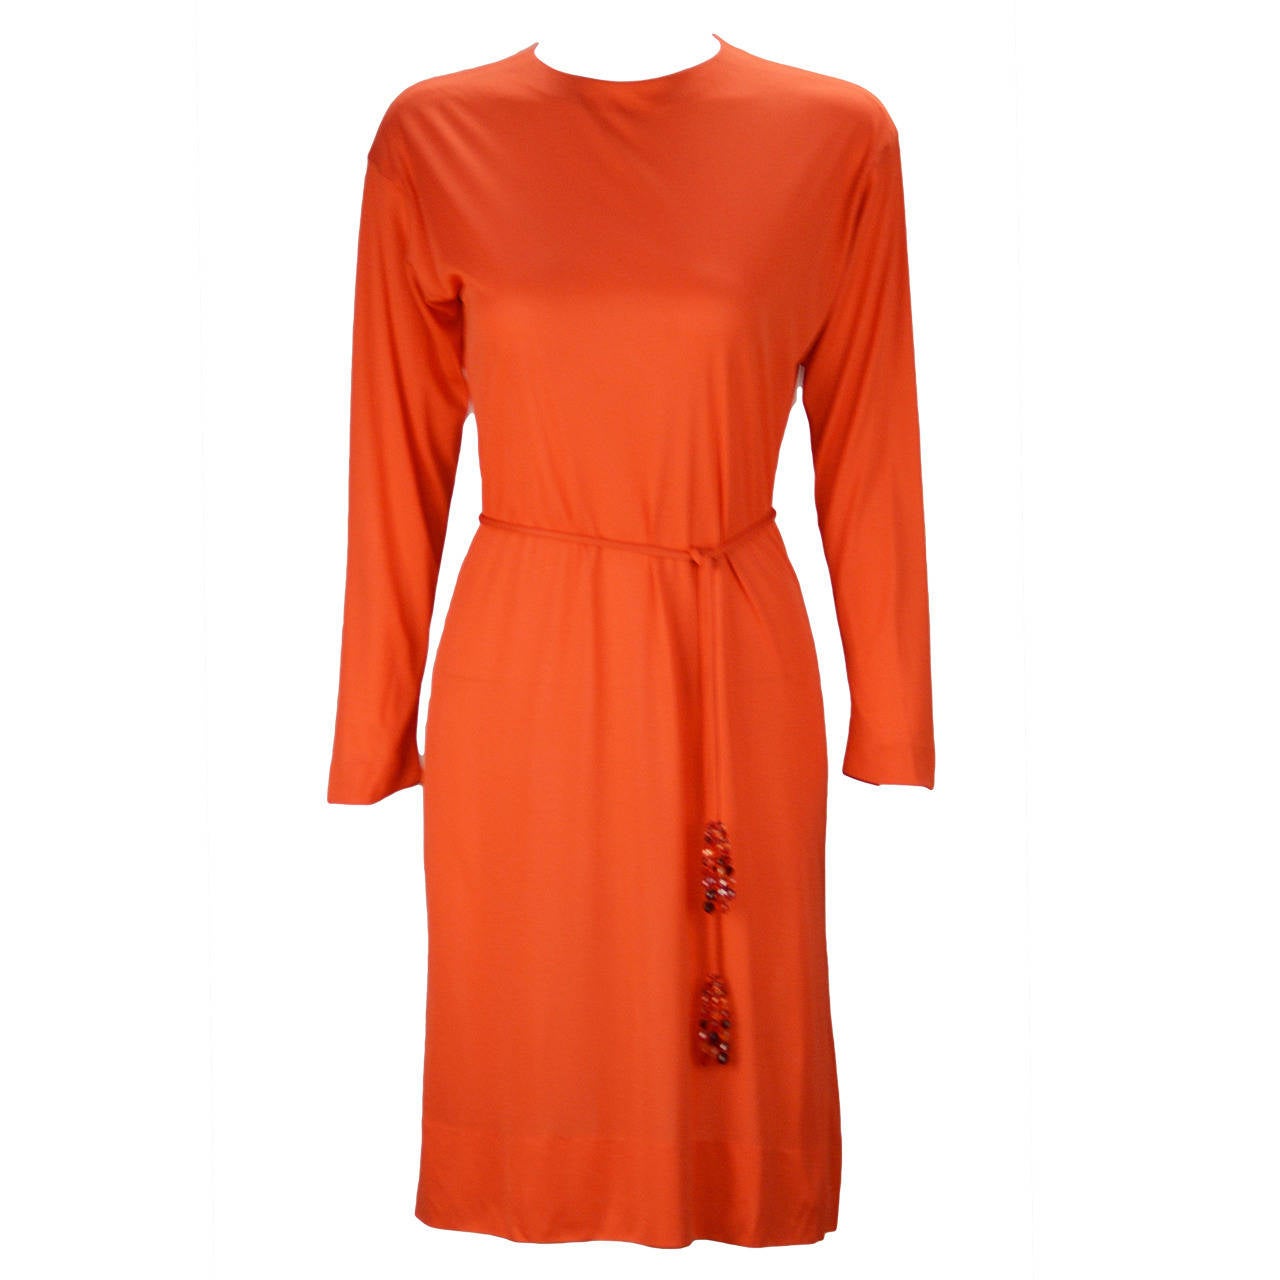 1960s Pucci Coral Silk Knit Dress and Coppola e Toppo Belt at 1stdibs